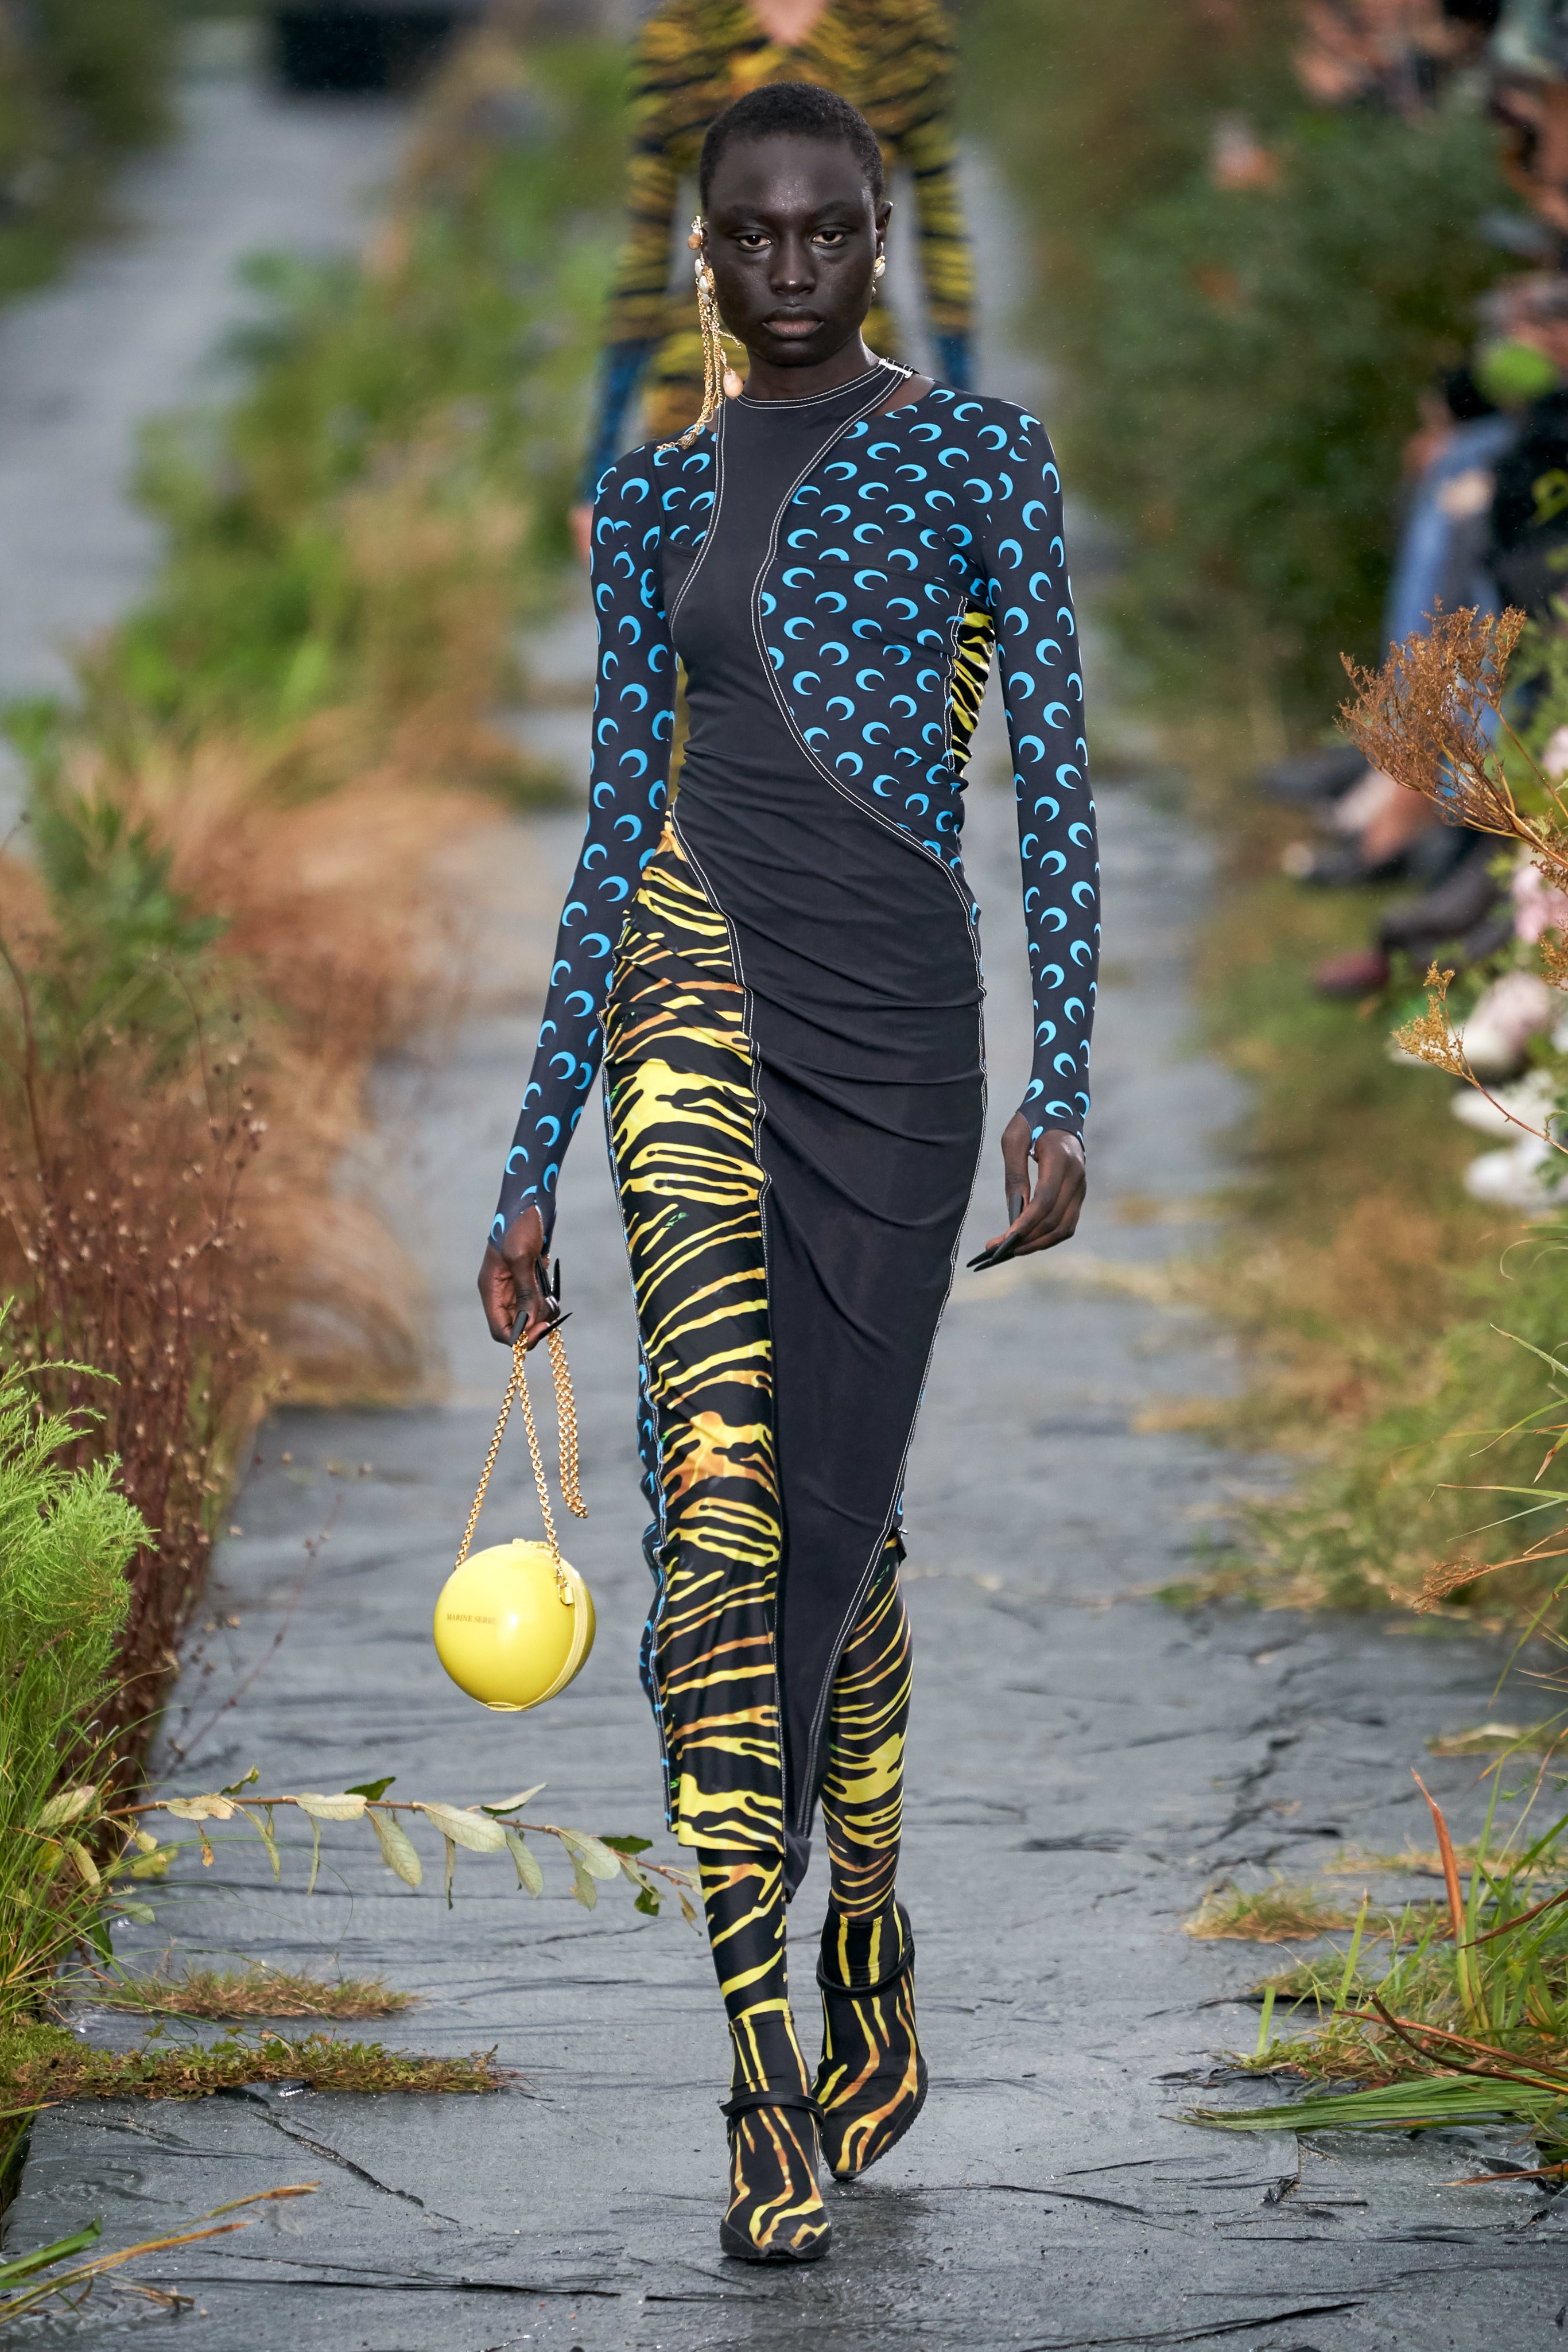 Marine serre Spring Summer 2020 SS2020 trends runway coverage Ready To Wear Vogue denim double trouble